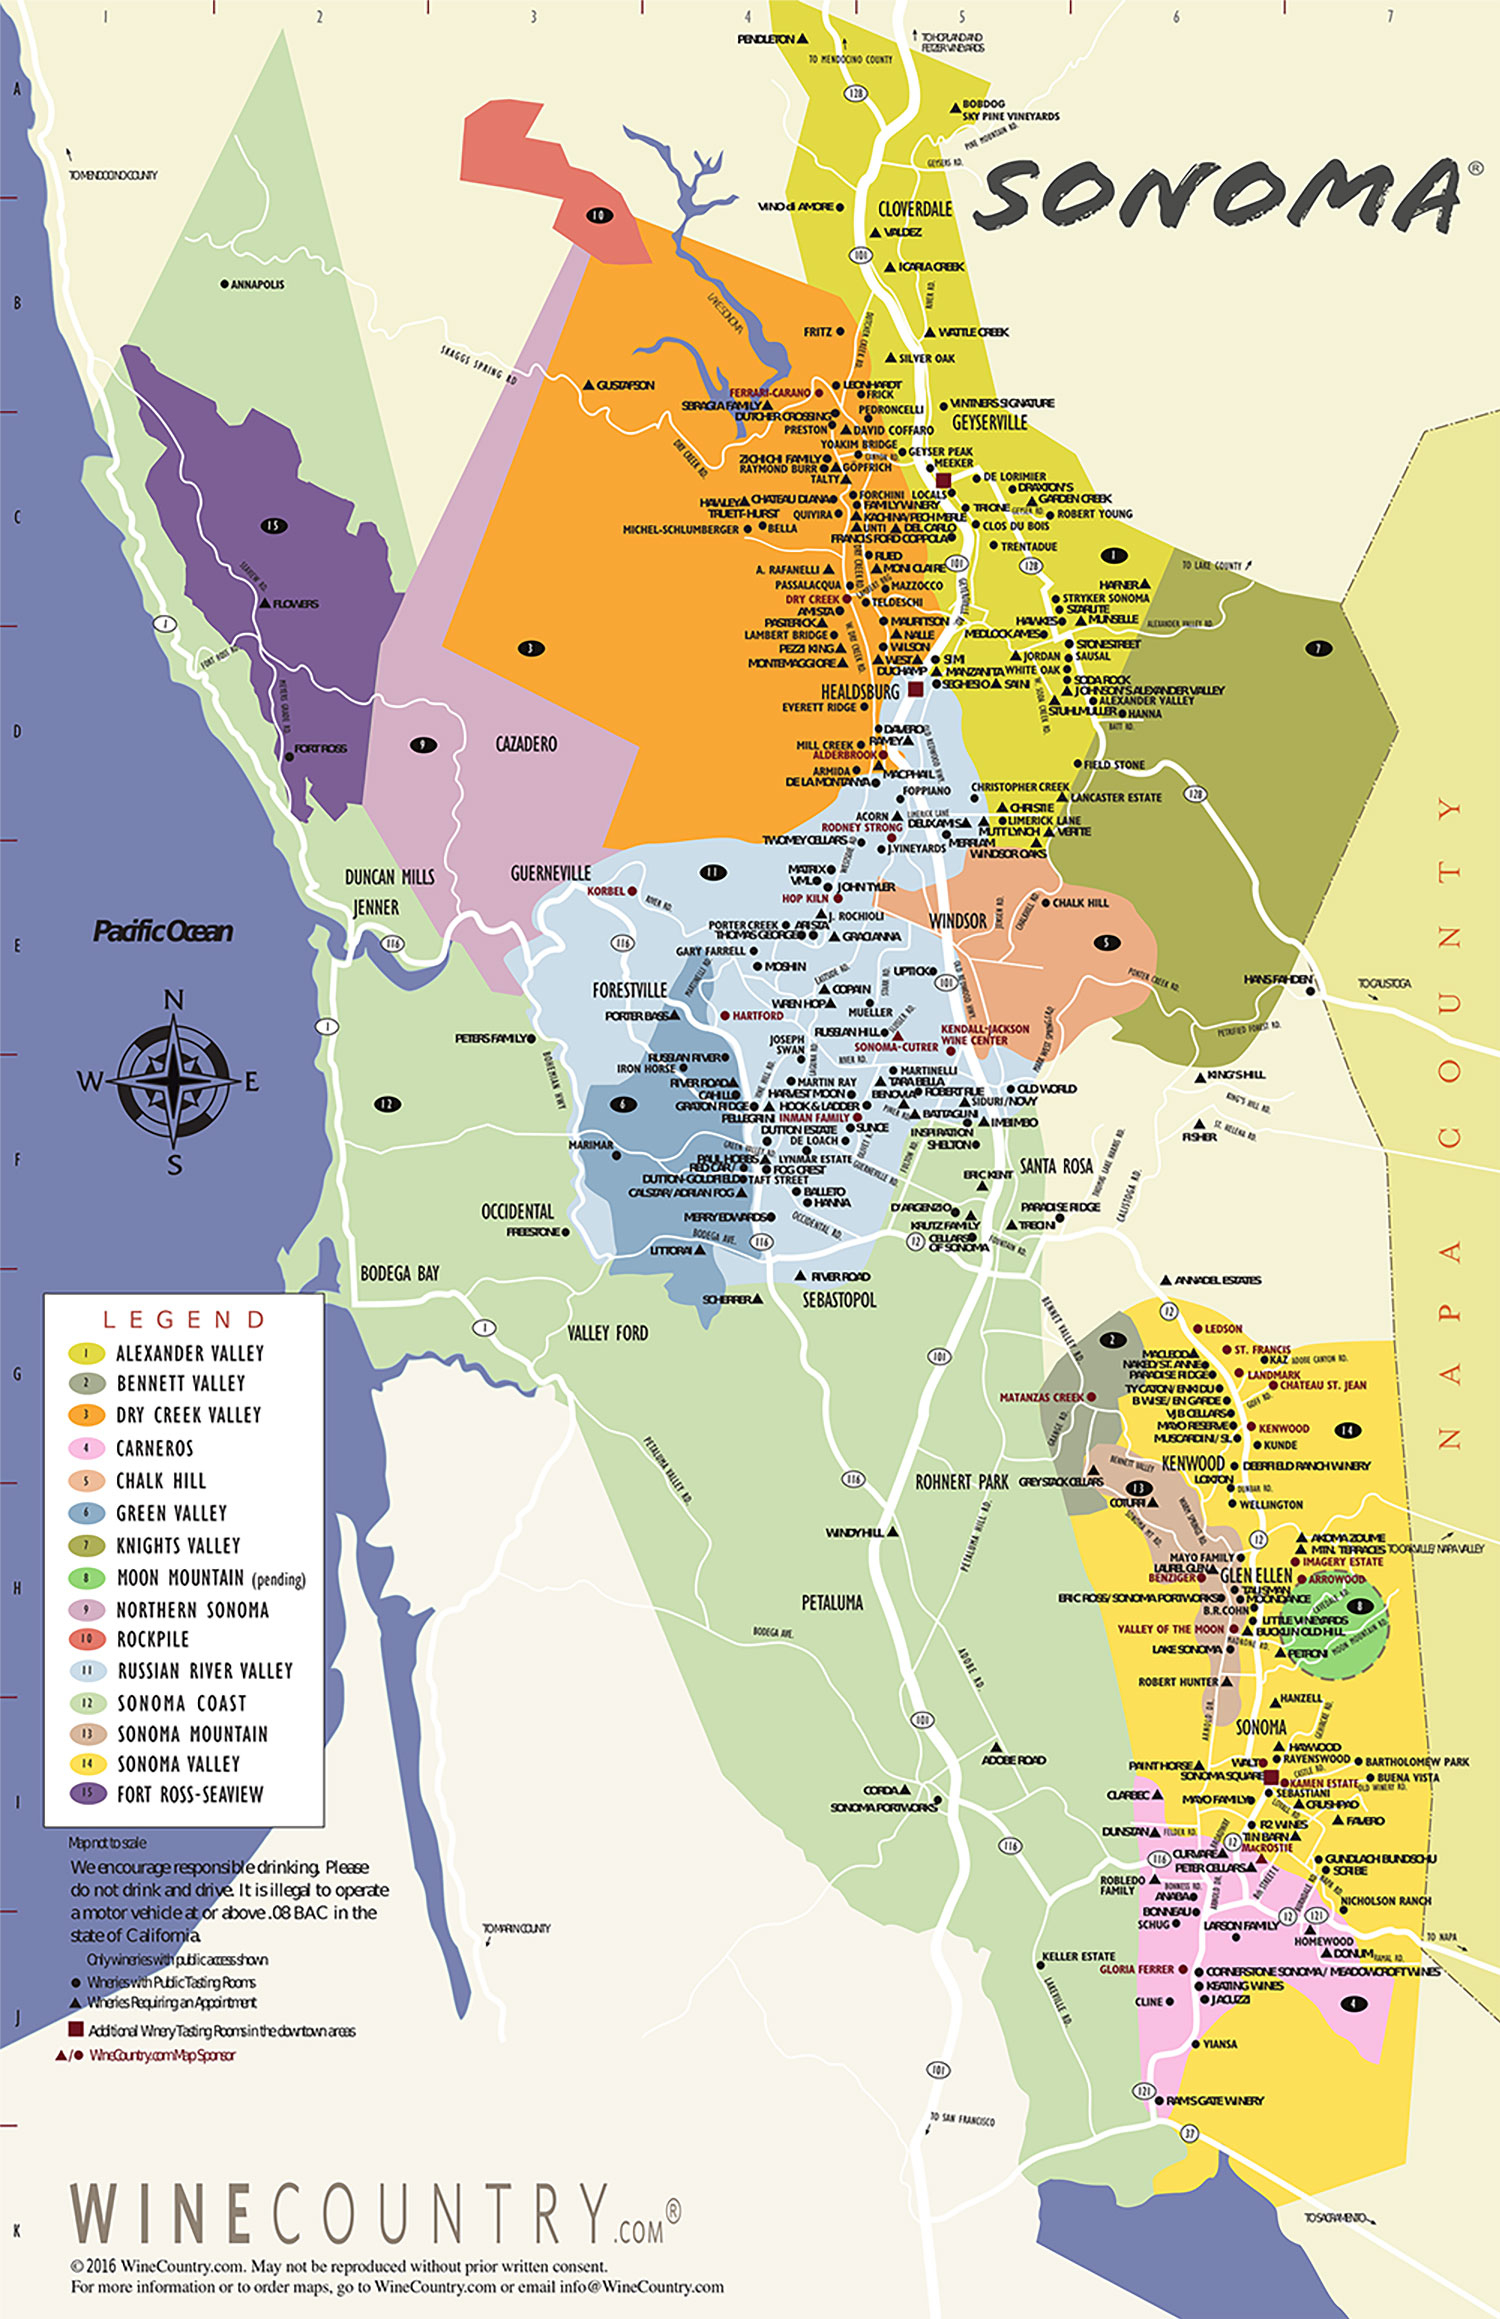 Sonoma County Wine Country Maps - Sonoma - Wine Country Map Of California